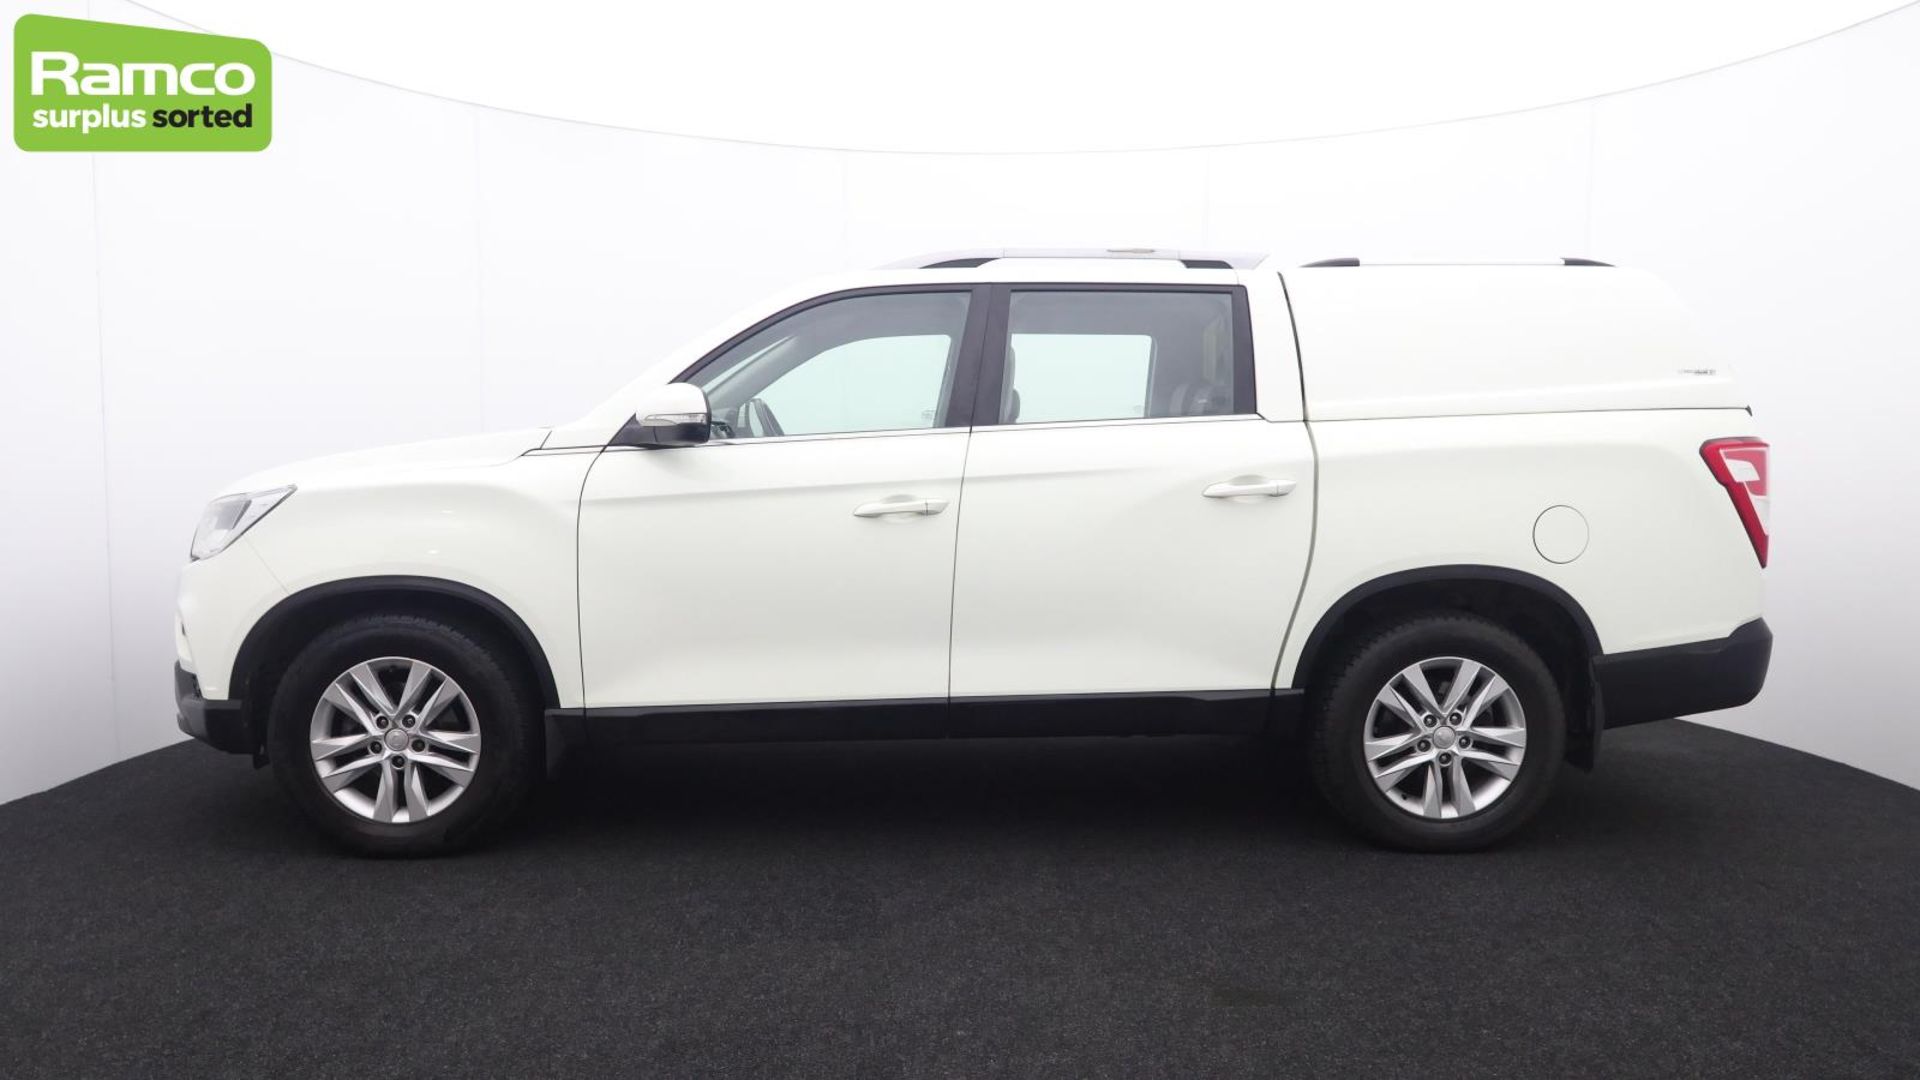 SsangYong Musso Rebel Auto RA19 NPP 2.2L Pick Up Euro 6 - Image 8 of 45